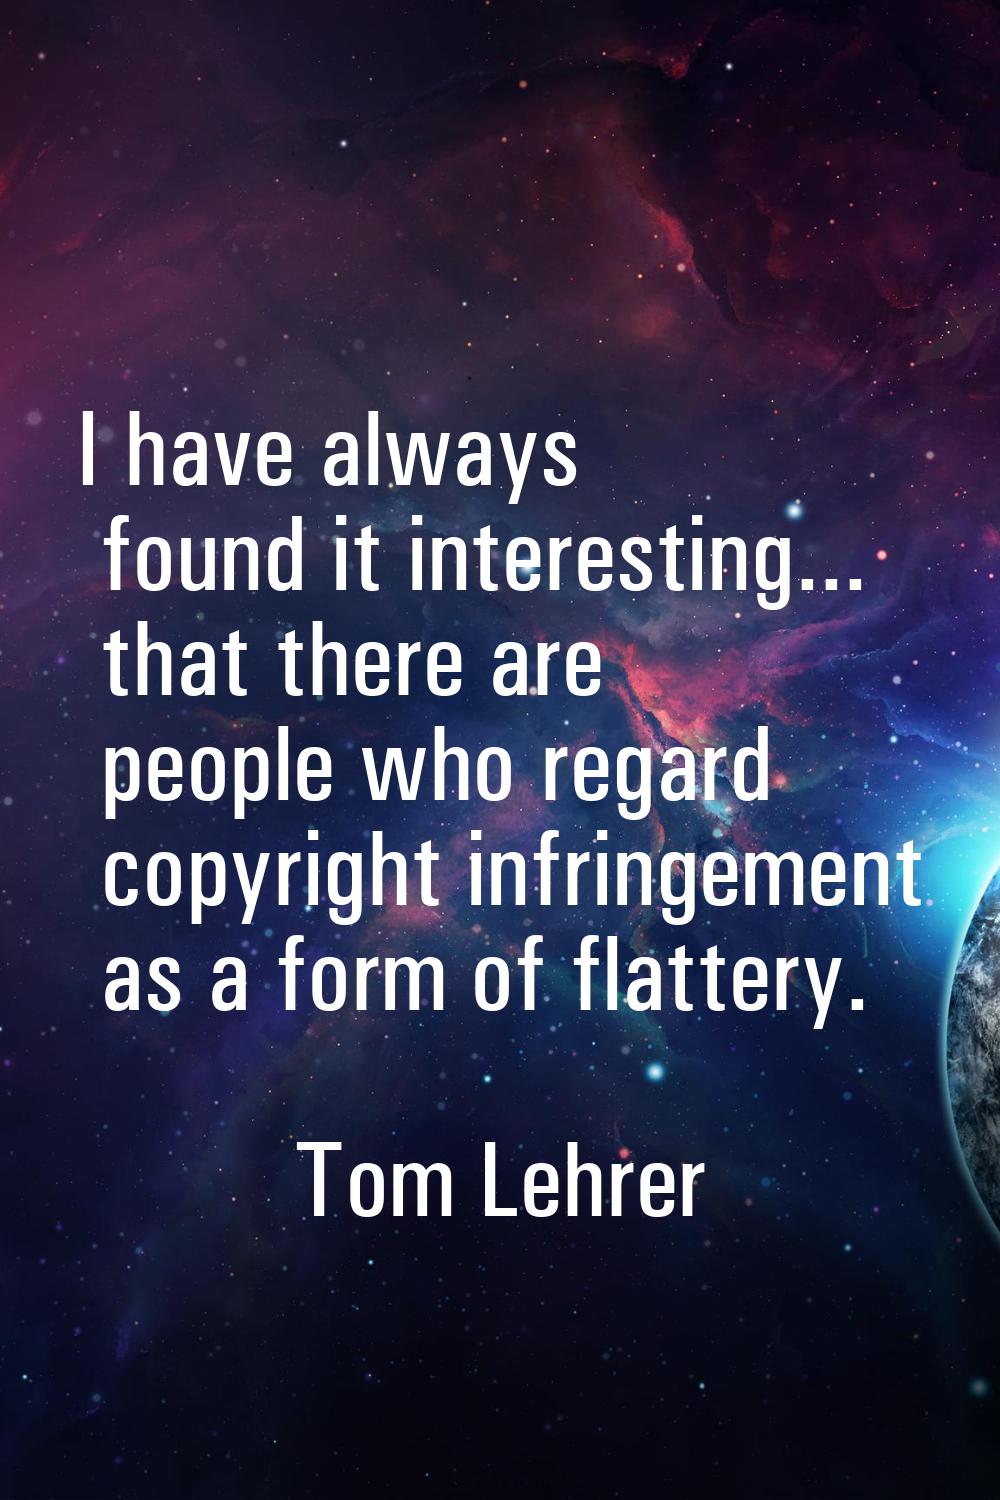 I have always found it interesting... that there are people who regard copyright infringement as a 